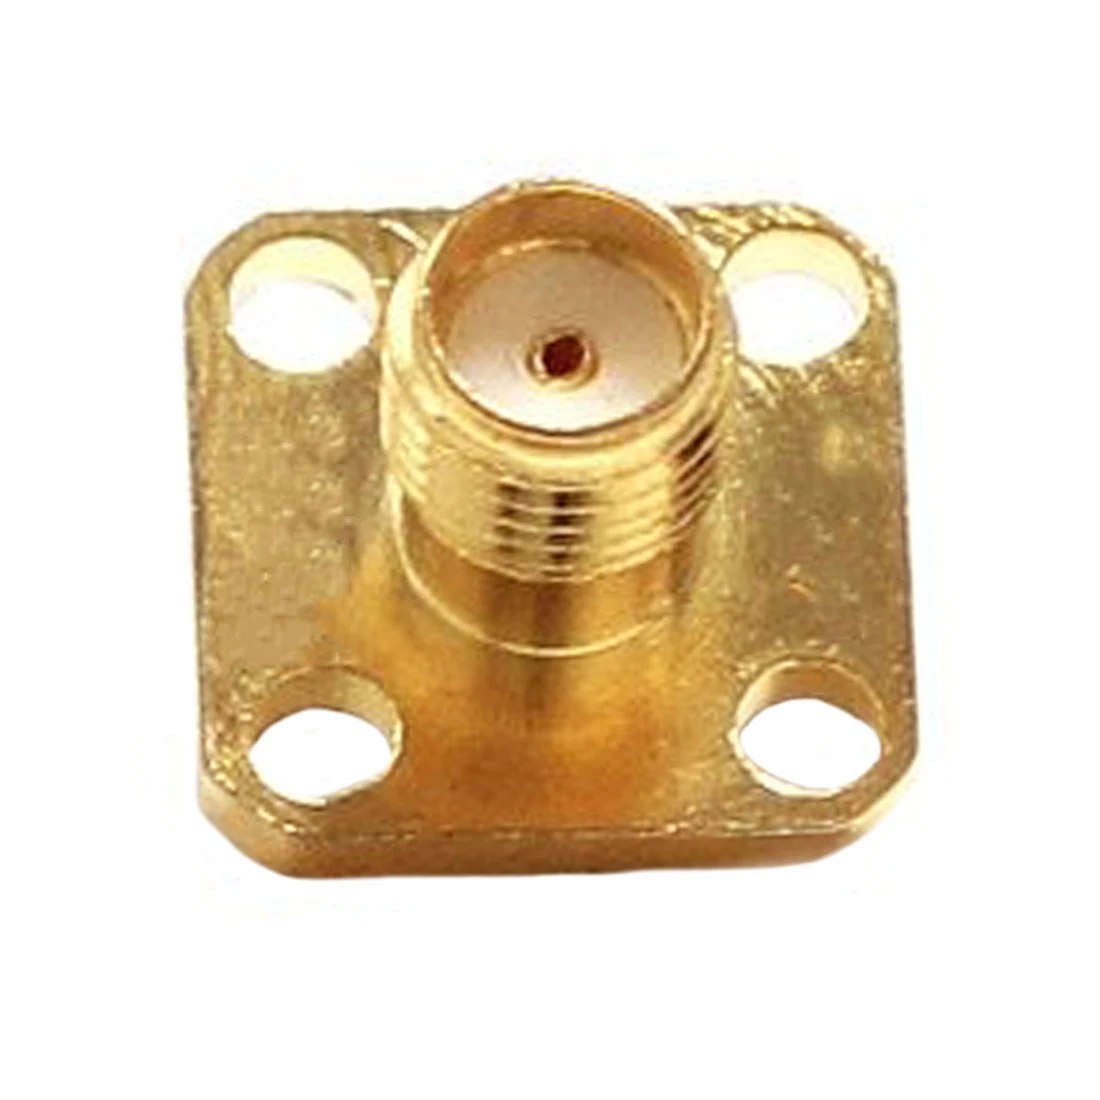 1pc SMA Female Chassis Jack 4-Hole Panel Mount Flange RF Connector With Solder Cup Welding Terminal Wholesale Fast Shipping